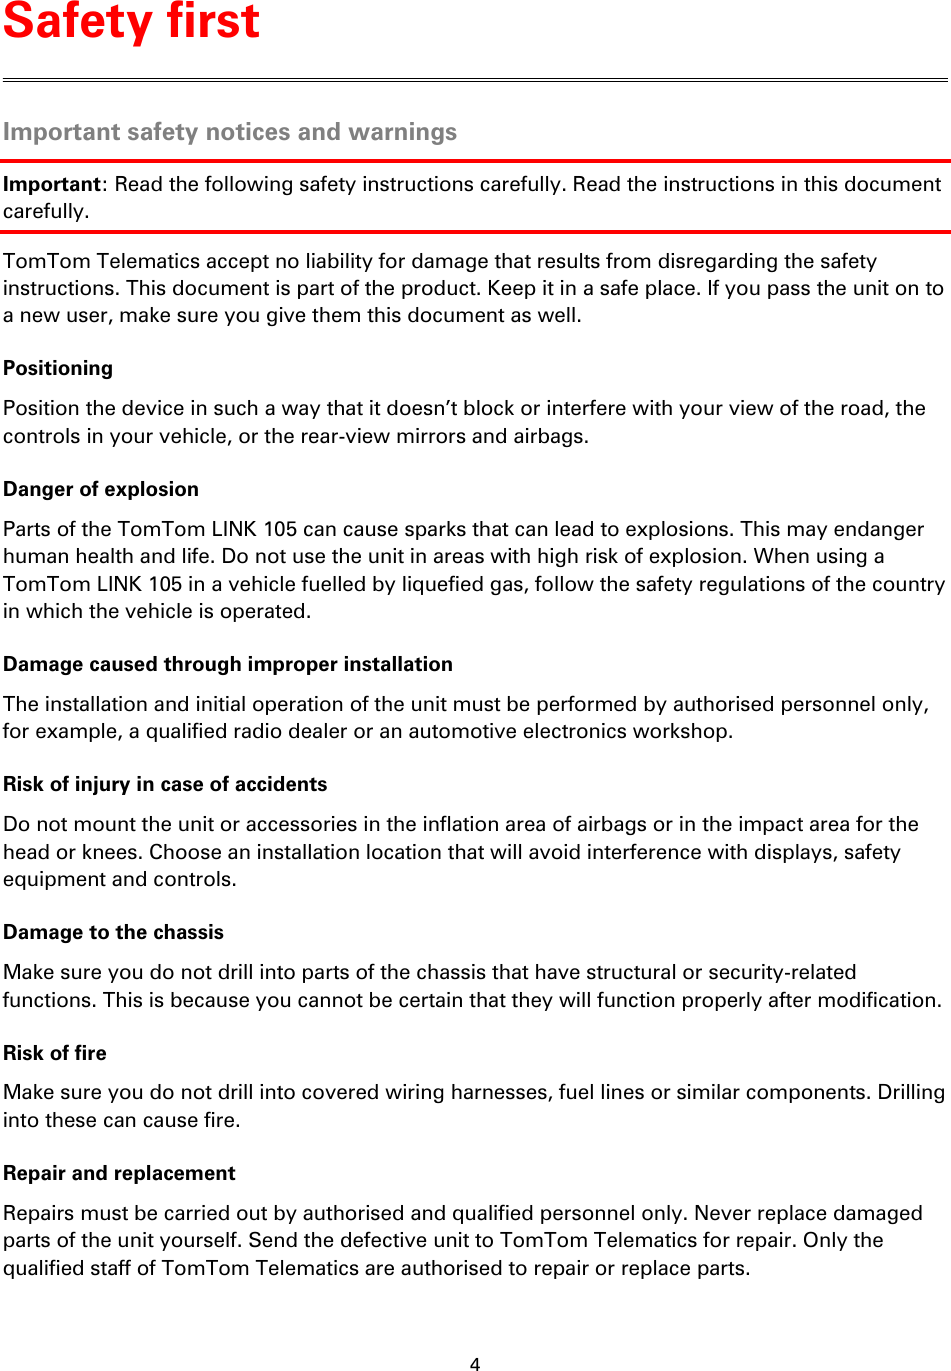 4    Important safety notices and warnings Important: Read the following safety instructions carefully. Read the instructions in this document carefully. TomTom Telematics accept no liability for damage that results from disregarding the safety instructions. This document is part of the product. Keep it in a safe place. If you pass the unit on to a new user, make sure you give them this document as well. Positioning Position the device in such a way that it doesn’t block or interfere with your view of the road, the controls in your vehicle, or the rear-view mirrors and airbags. Danger of explosion Parts of the TomTom LINK 105 can cause sparks that can lead to explosions. This may endanger human health and life. Do not use the unit in areas with high risk of explosion. When using a TomTom LINK 105 in a vehicle fuelled by liquefied gas, follow the safety regulations of the country in which the vehicle is operated. Damage caused through improper installation The installation and initial operation of the unit must be performed by authorised personnel only, for example, a qualified radio dealer or an automotive electronics workshop. Risk of injury in case of accidents Do not mount the unit or accessories in the inflation area of airbags or in the impact area for the head or knees. Choose an installation location that will avoid interference with displays, safety equipment and controls. Damage to the chassis Make sure you do not drill into parts of the chassis that have structural or security-related functions. This is because you cannot be certain that they will function properly after modification. Risk of fire Make sure you do not drill into covered wiring harnesses, fuel lines or similar components. Drilling into these can cause fire. Repair and replacement Repairs must be carried out by authorised and qualified personnel only. Never replace damaged parts of the unit yourself. Send the defective unit to TomTom Telematics for repair. Only the qualified staff of TomTom Telematics are authorised to repair or replace parts. Safety first 